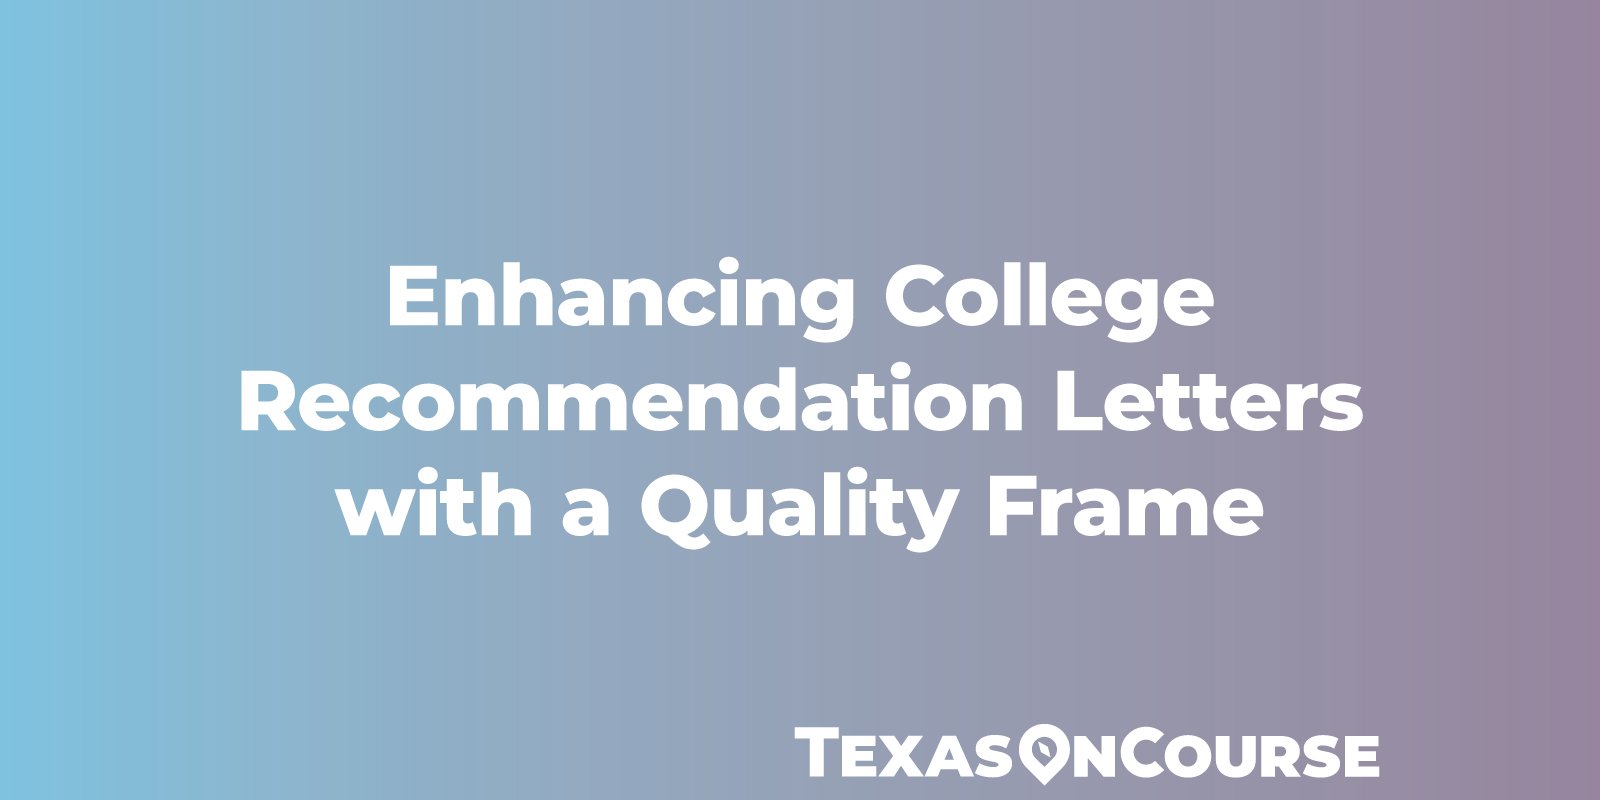 Enhancing College Recommendation Letters with a Quality Frame